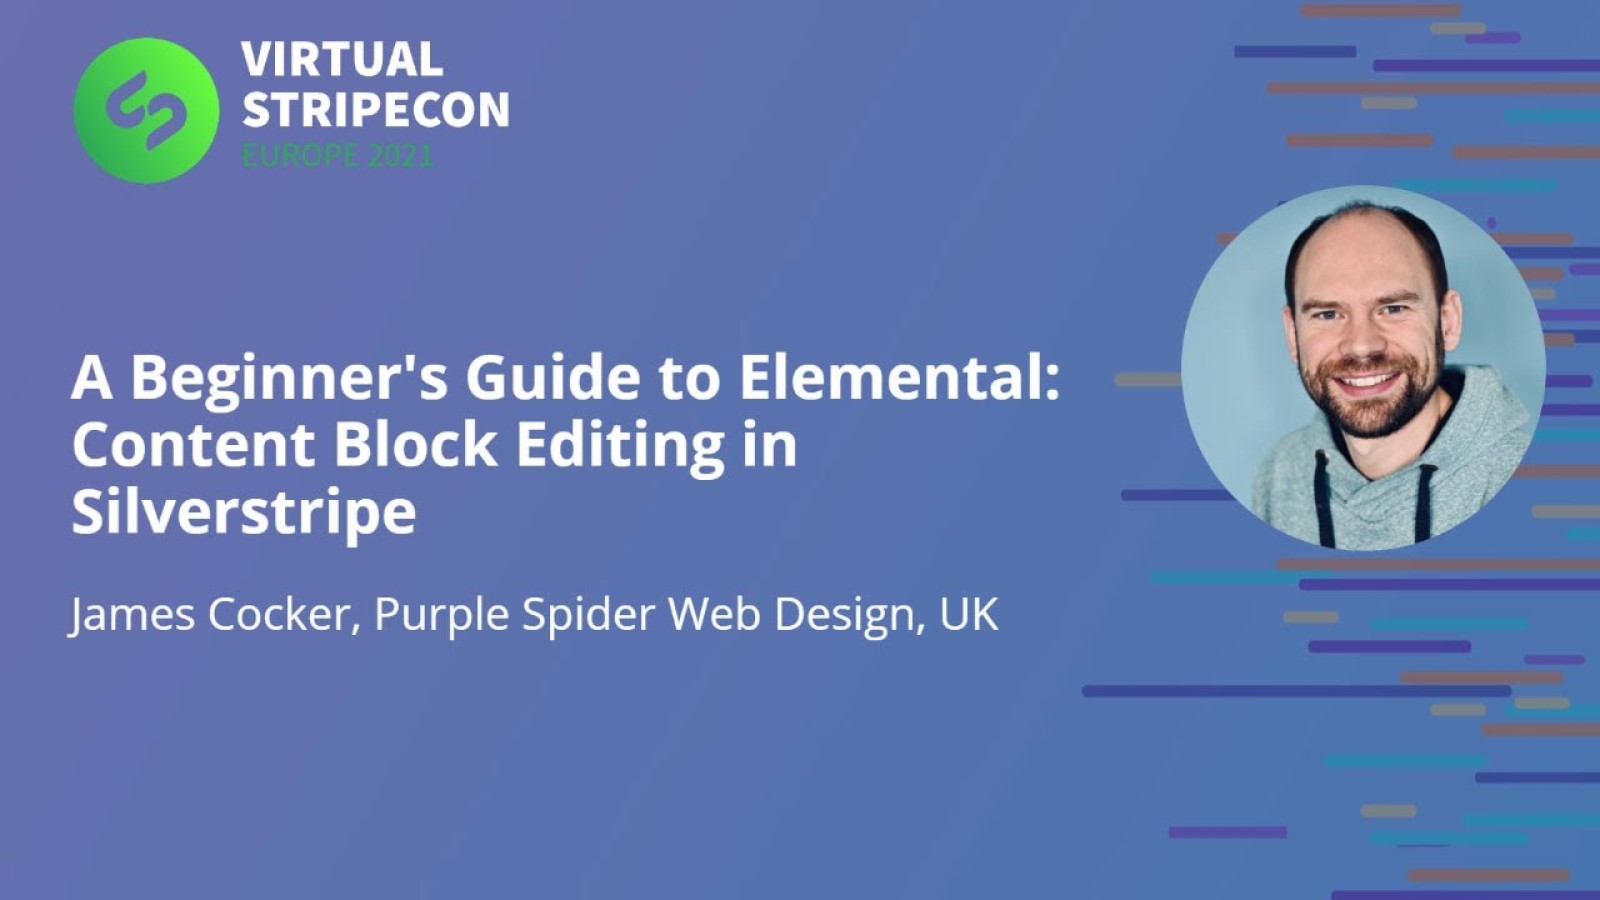 A Beginner’s Guide to Elemental: Content Block Editing in Silverstripe